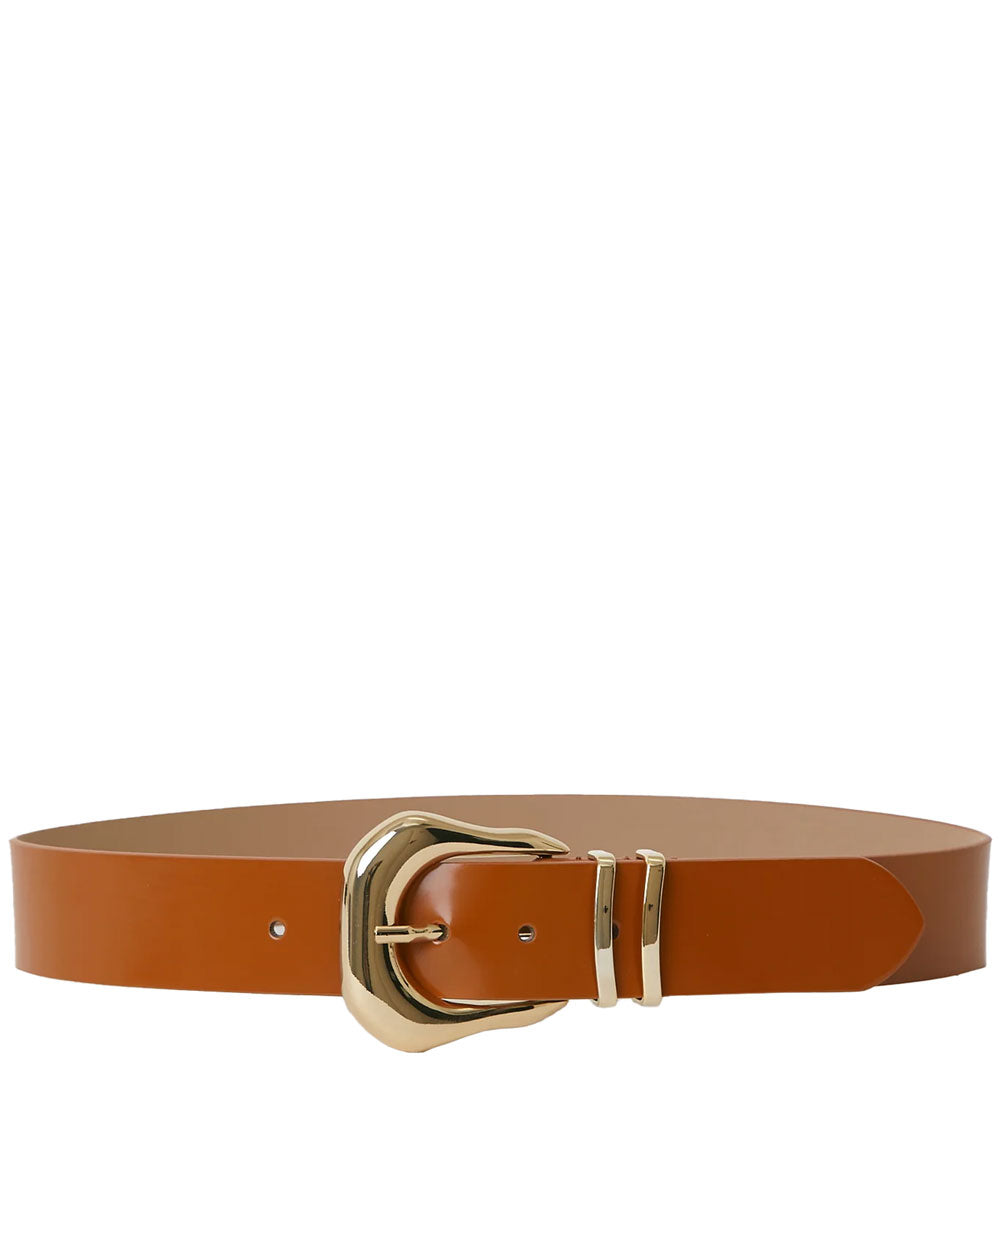 Koda Mod Leather Belt in Cuoio and Gold